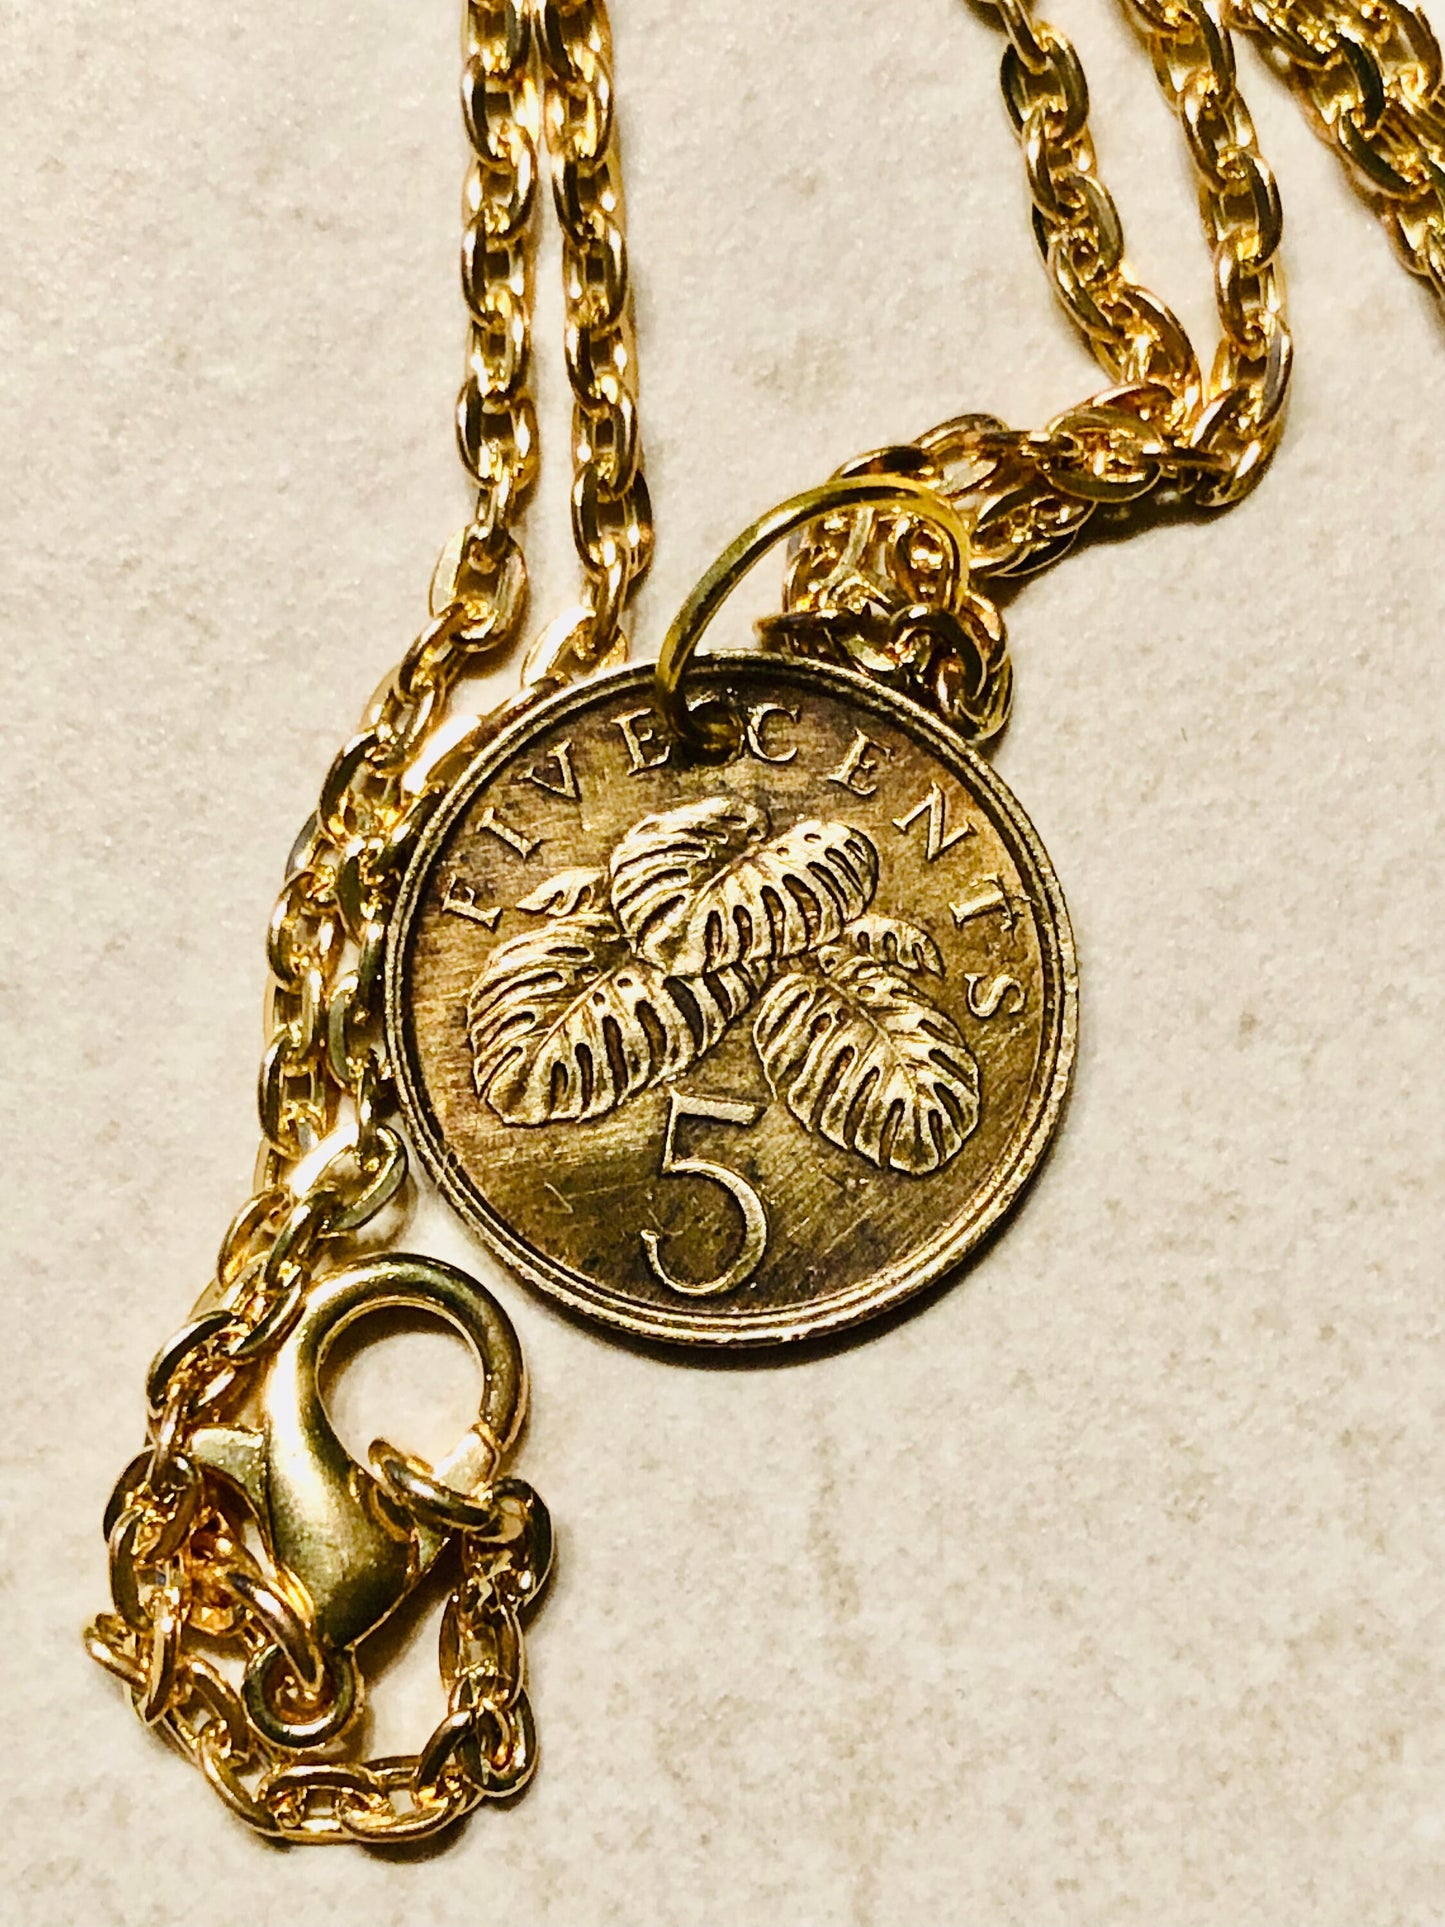 Singapore Hong Kong Necklace 5 Cent Coin Pendant Personal Old Vintage Handmade Jewelry Gift Friend Charm For Him Her World Coin Collector